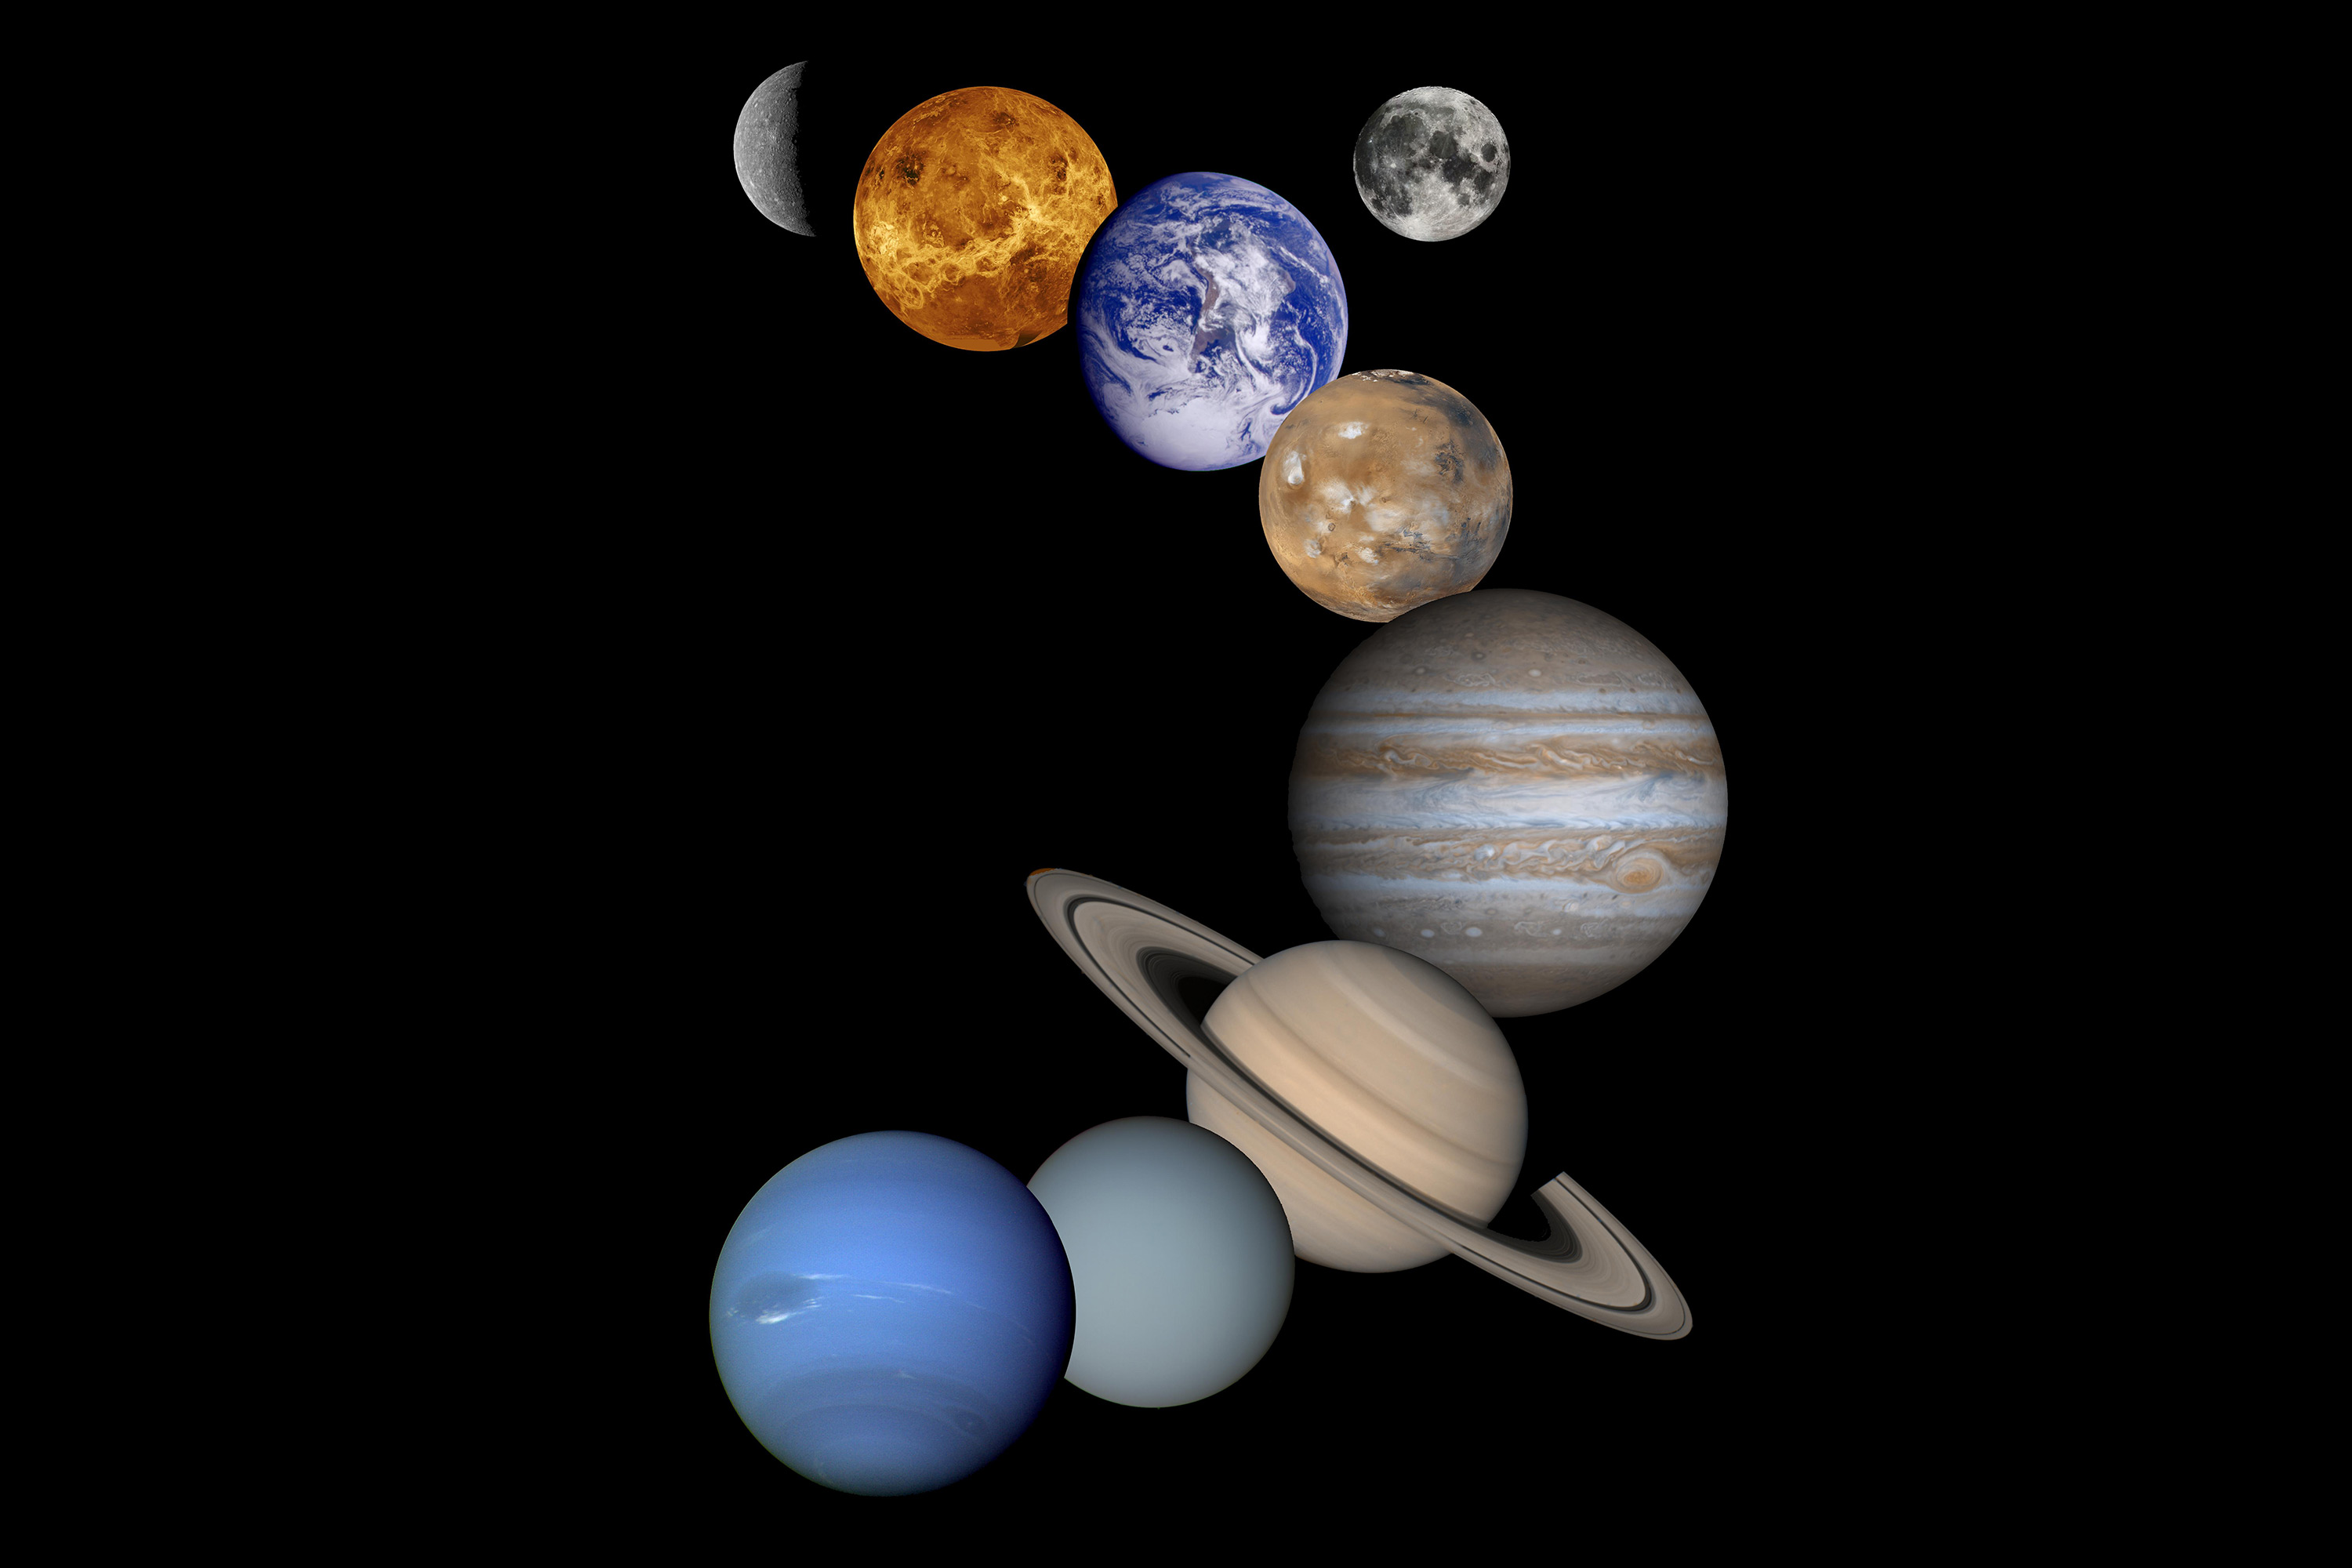 Why Do All of the Planets Orbit in the Same Direction?